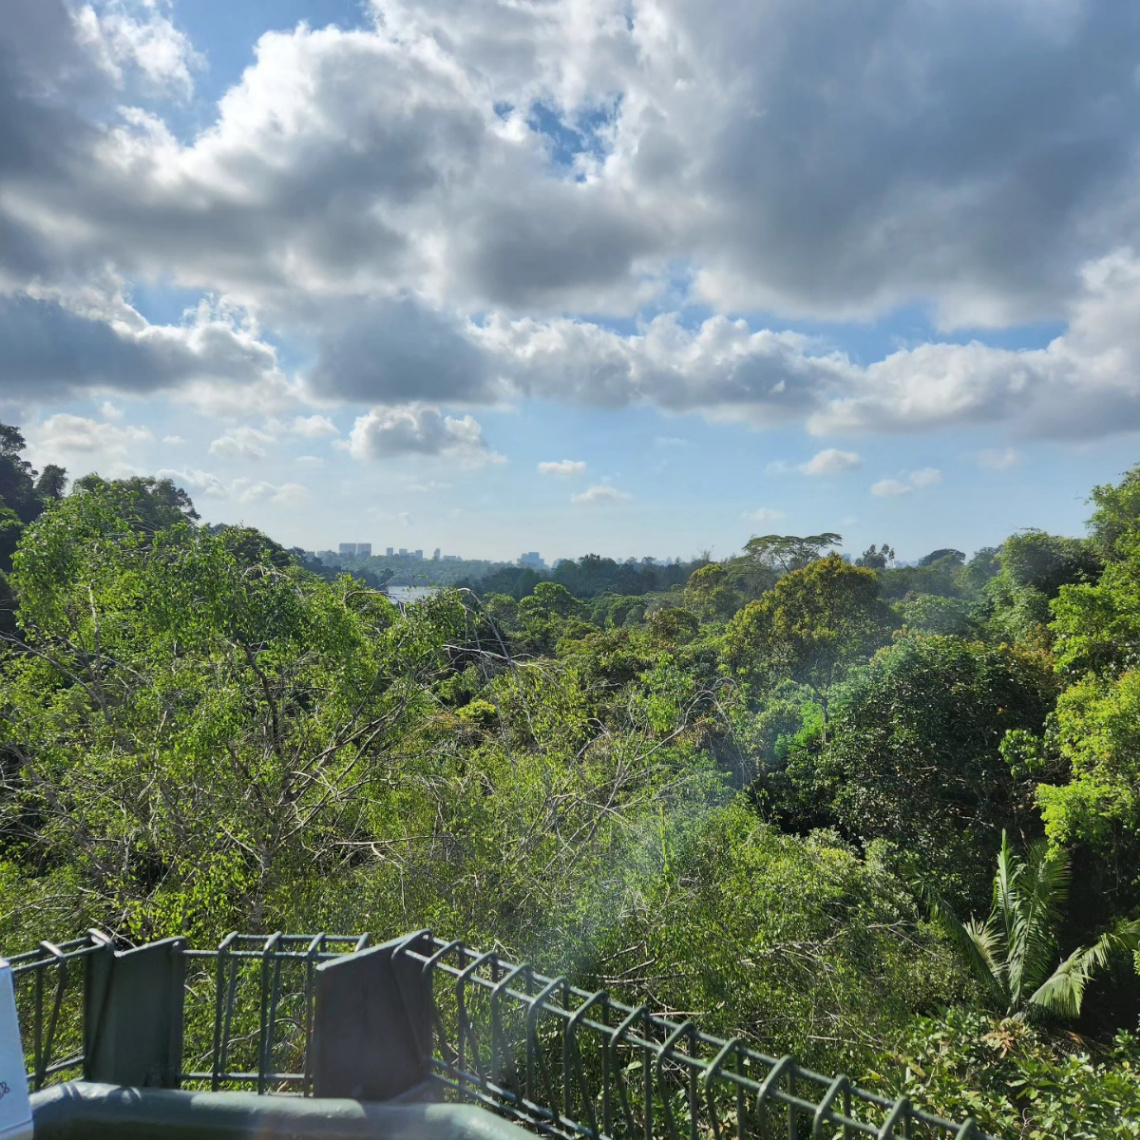 Thrifty Travels: 15 Budget-Friendly Company Outing Ideas in Singapore - MacRitchie Reservoir